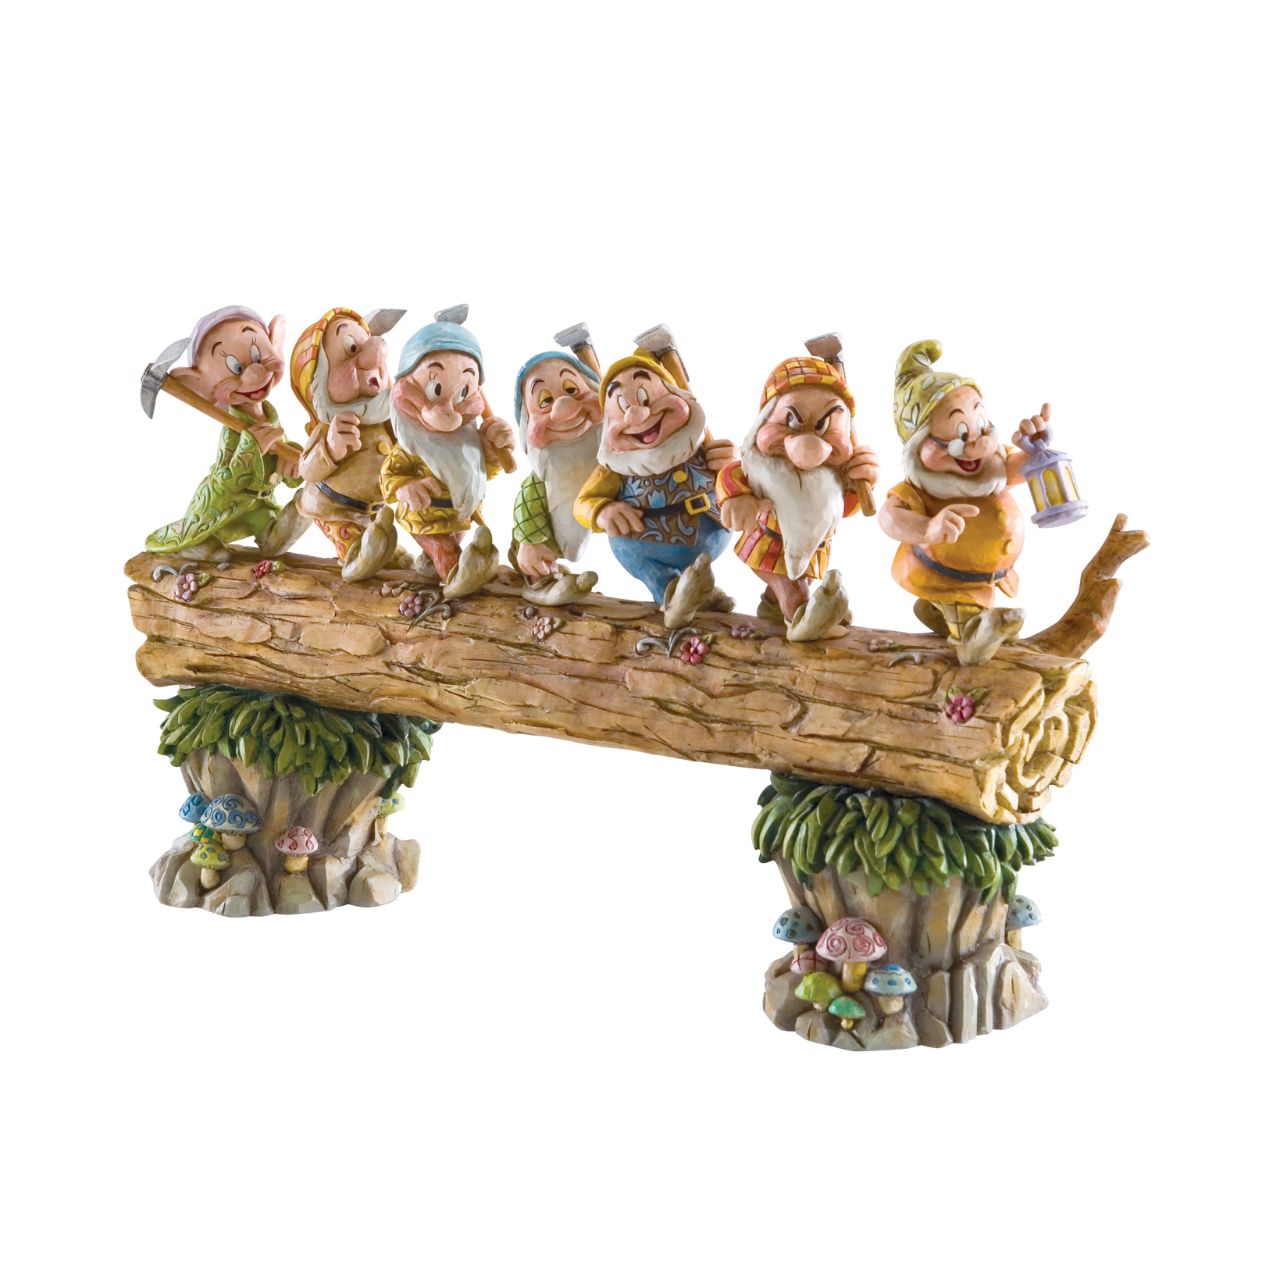 Disney Traditions Homeward Bound Seven Dwarfs Figurine  Homeward Bound captures a very memorable scene from the classic Snow White animation; the lovable 7 Dwarfs return home to find an unexpected house guest: a sleeping Princess.